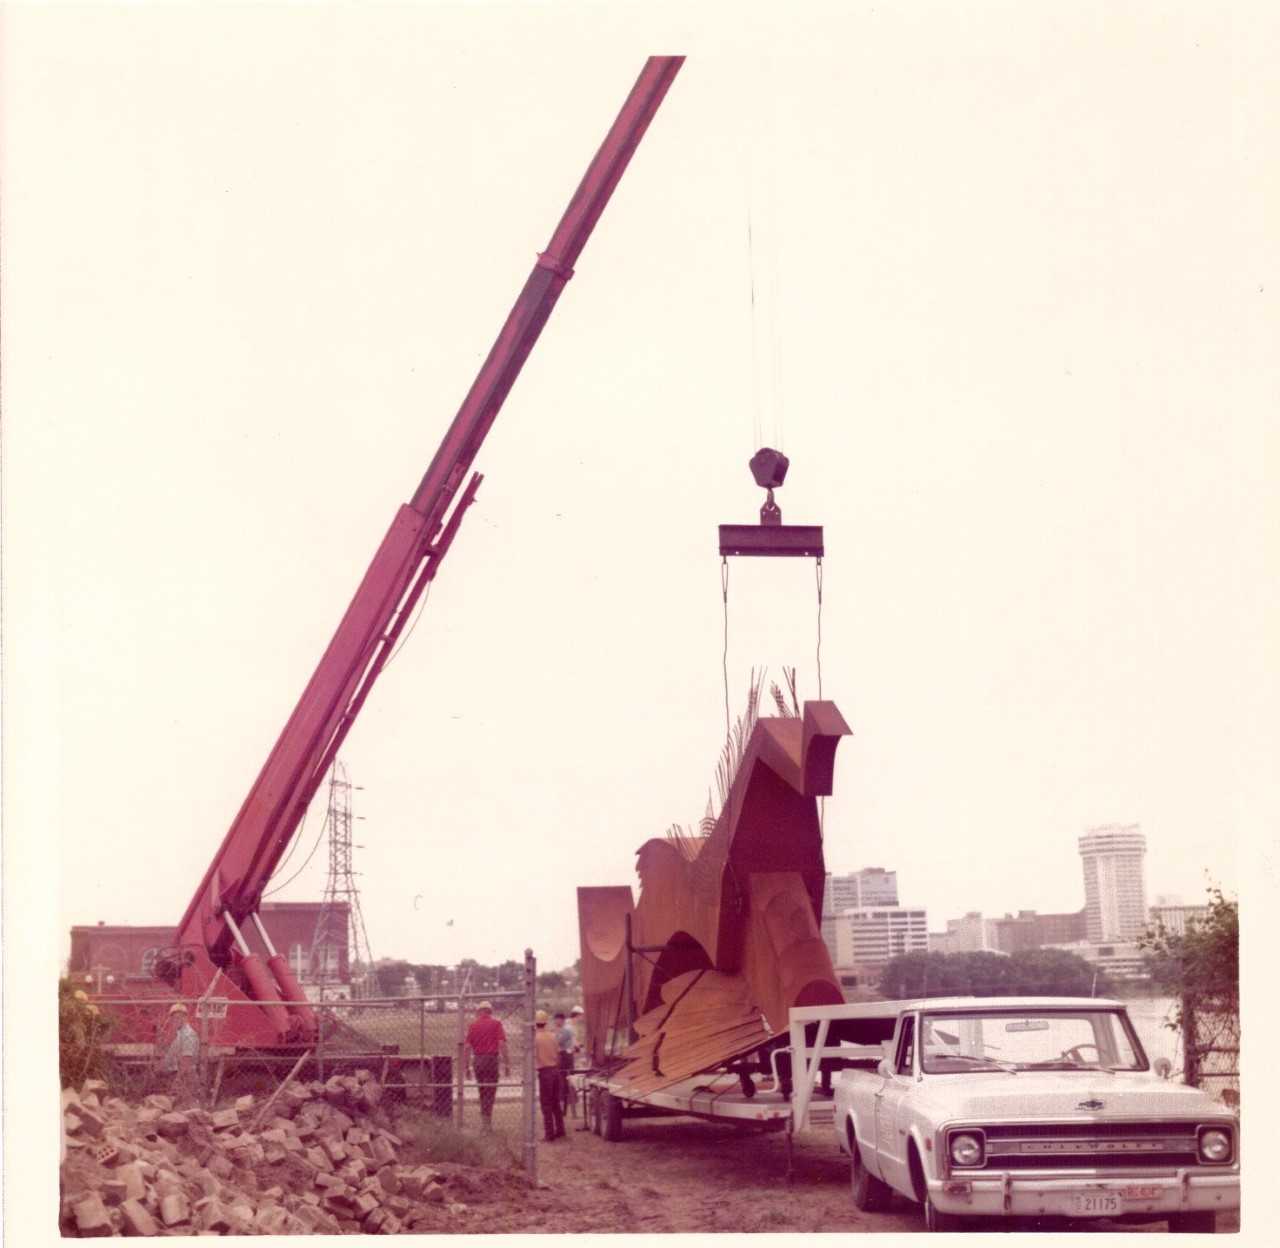 Crane operator Mario Barnoski beginning the process of lifting the Keeper of the Plains into place at the confluence of the Arkansas and Little Arkansas Rivers on May 18, 1974. Barnoski's family says they found this photo in an old scrapbook.